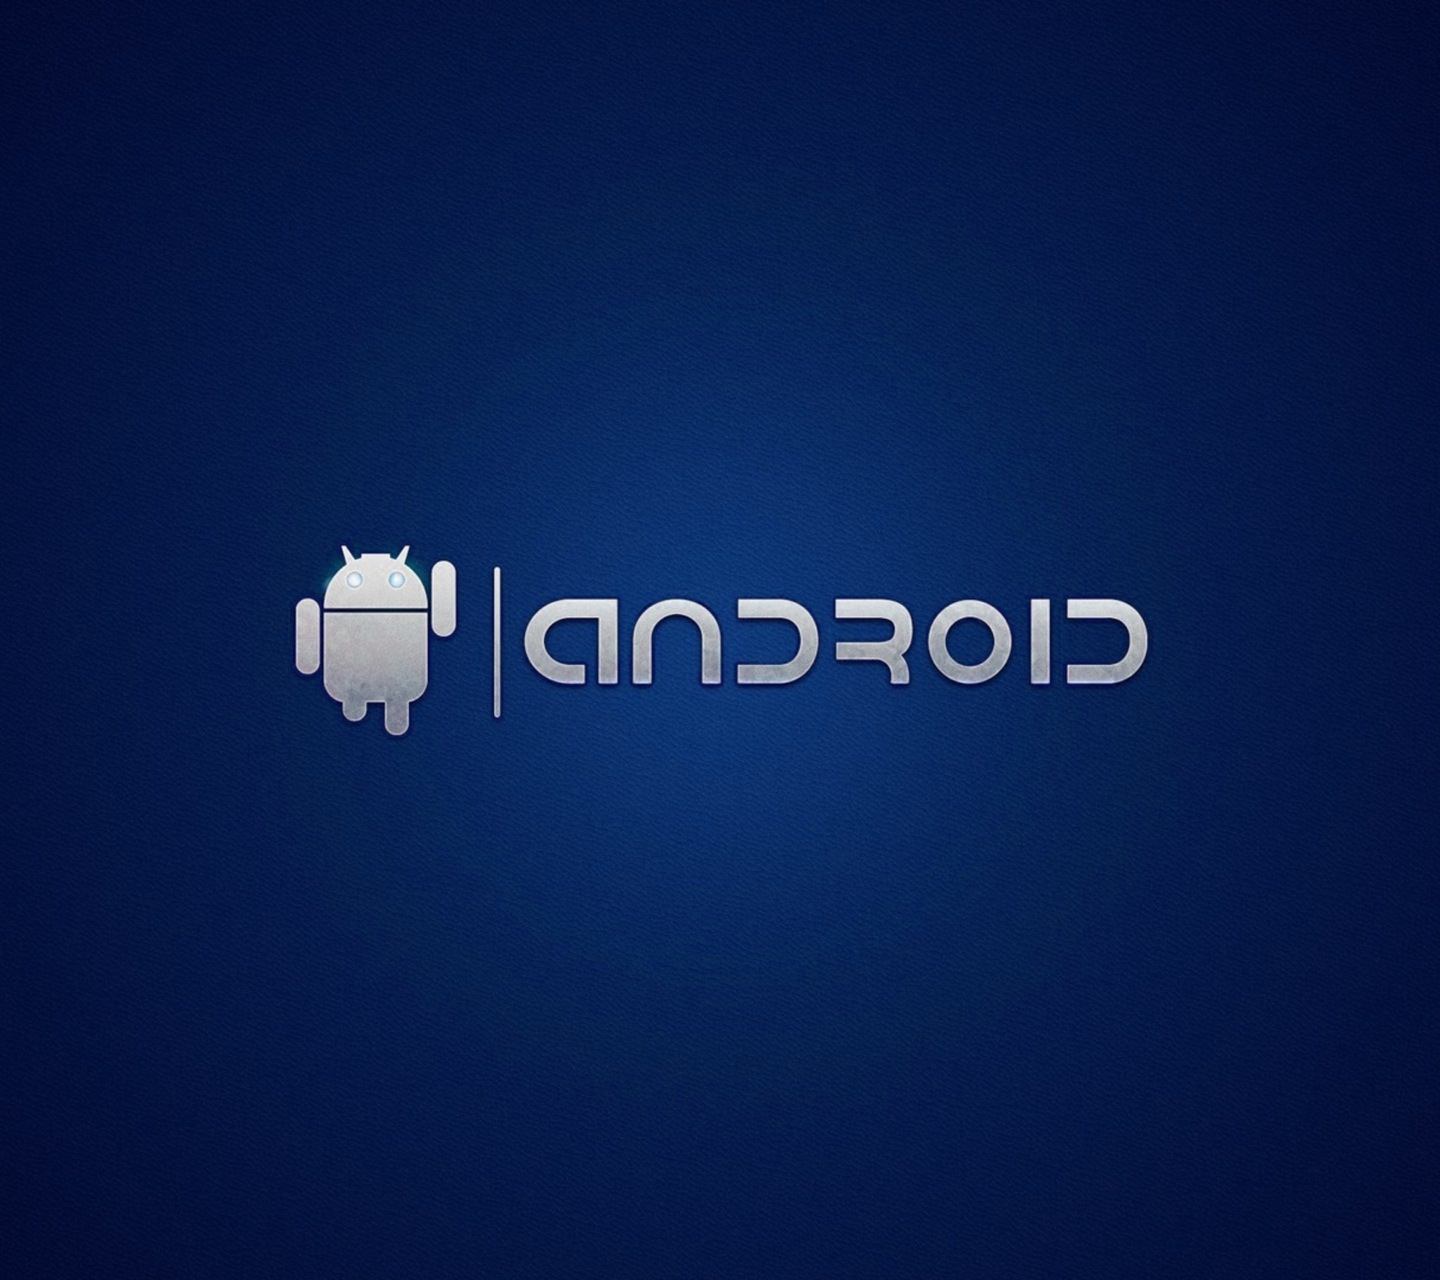 Android Logo Blue Wallpaper Sc Smartphone